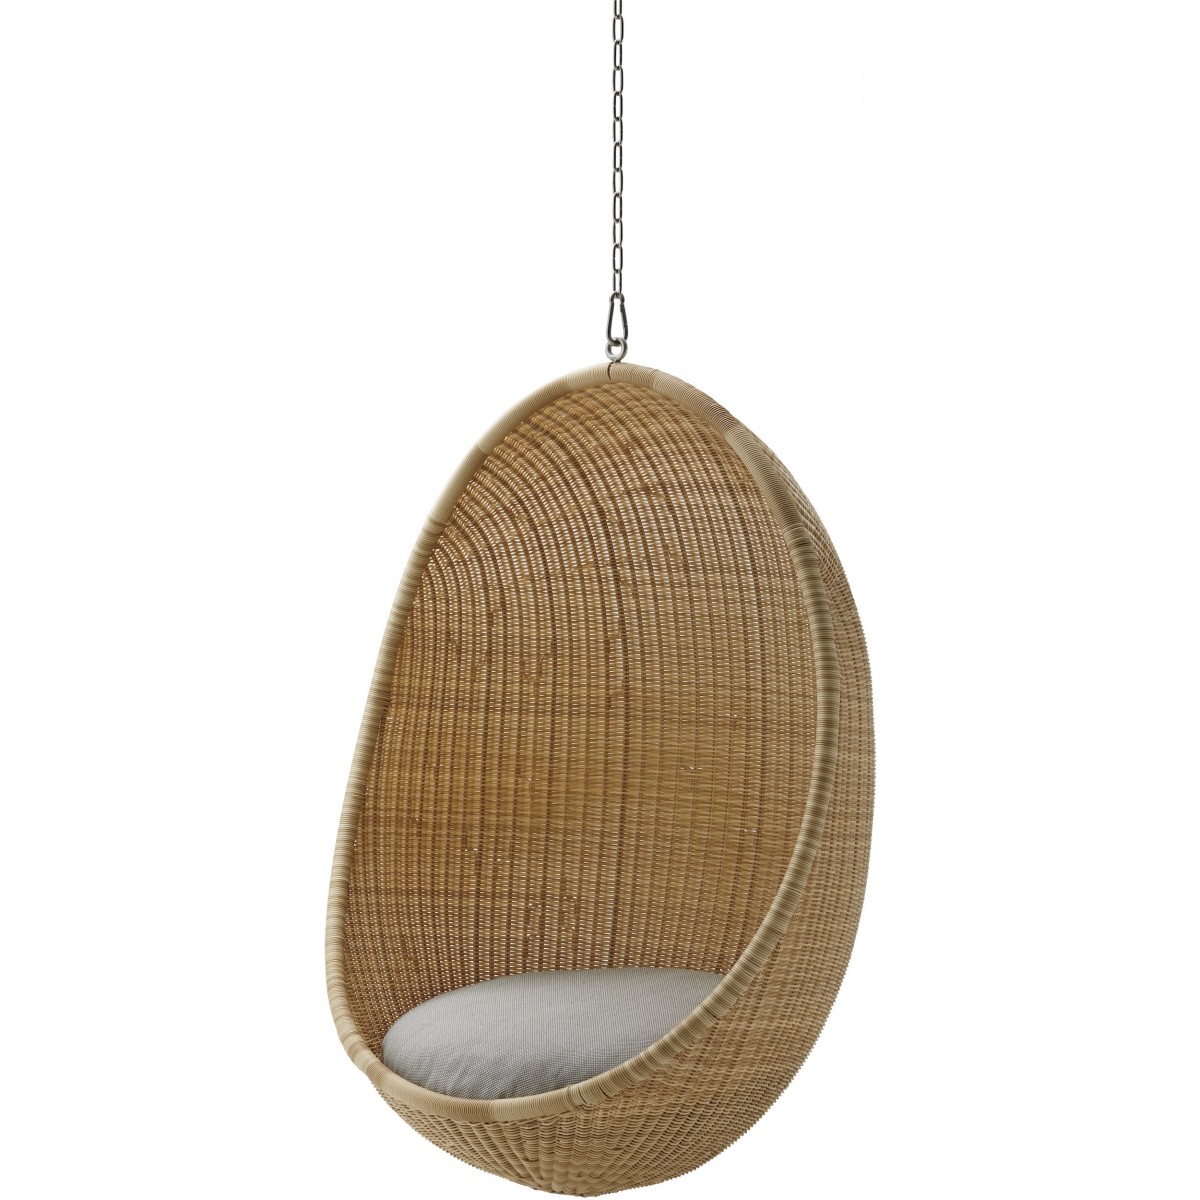 cushion for hanging Egg chair - outdoor version